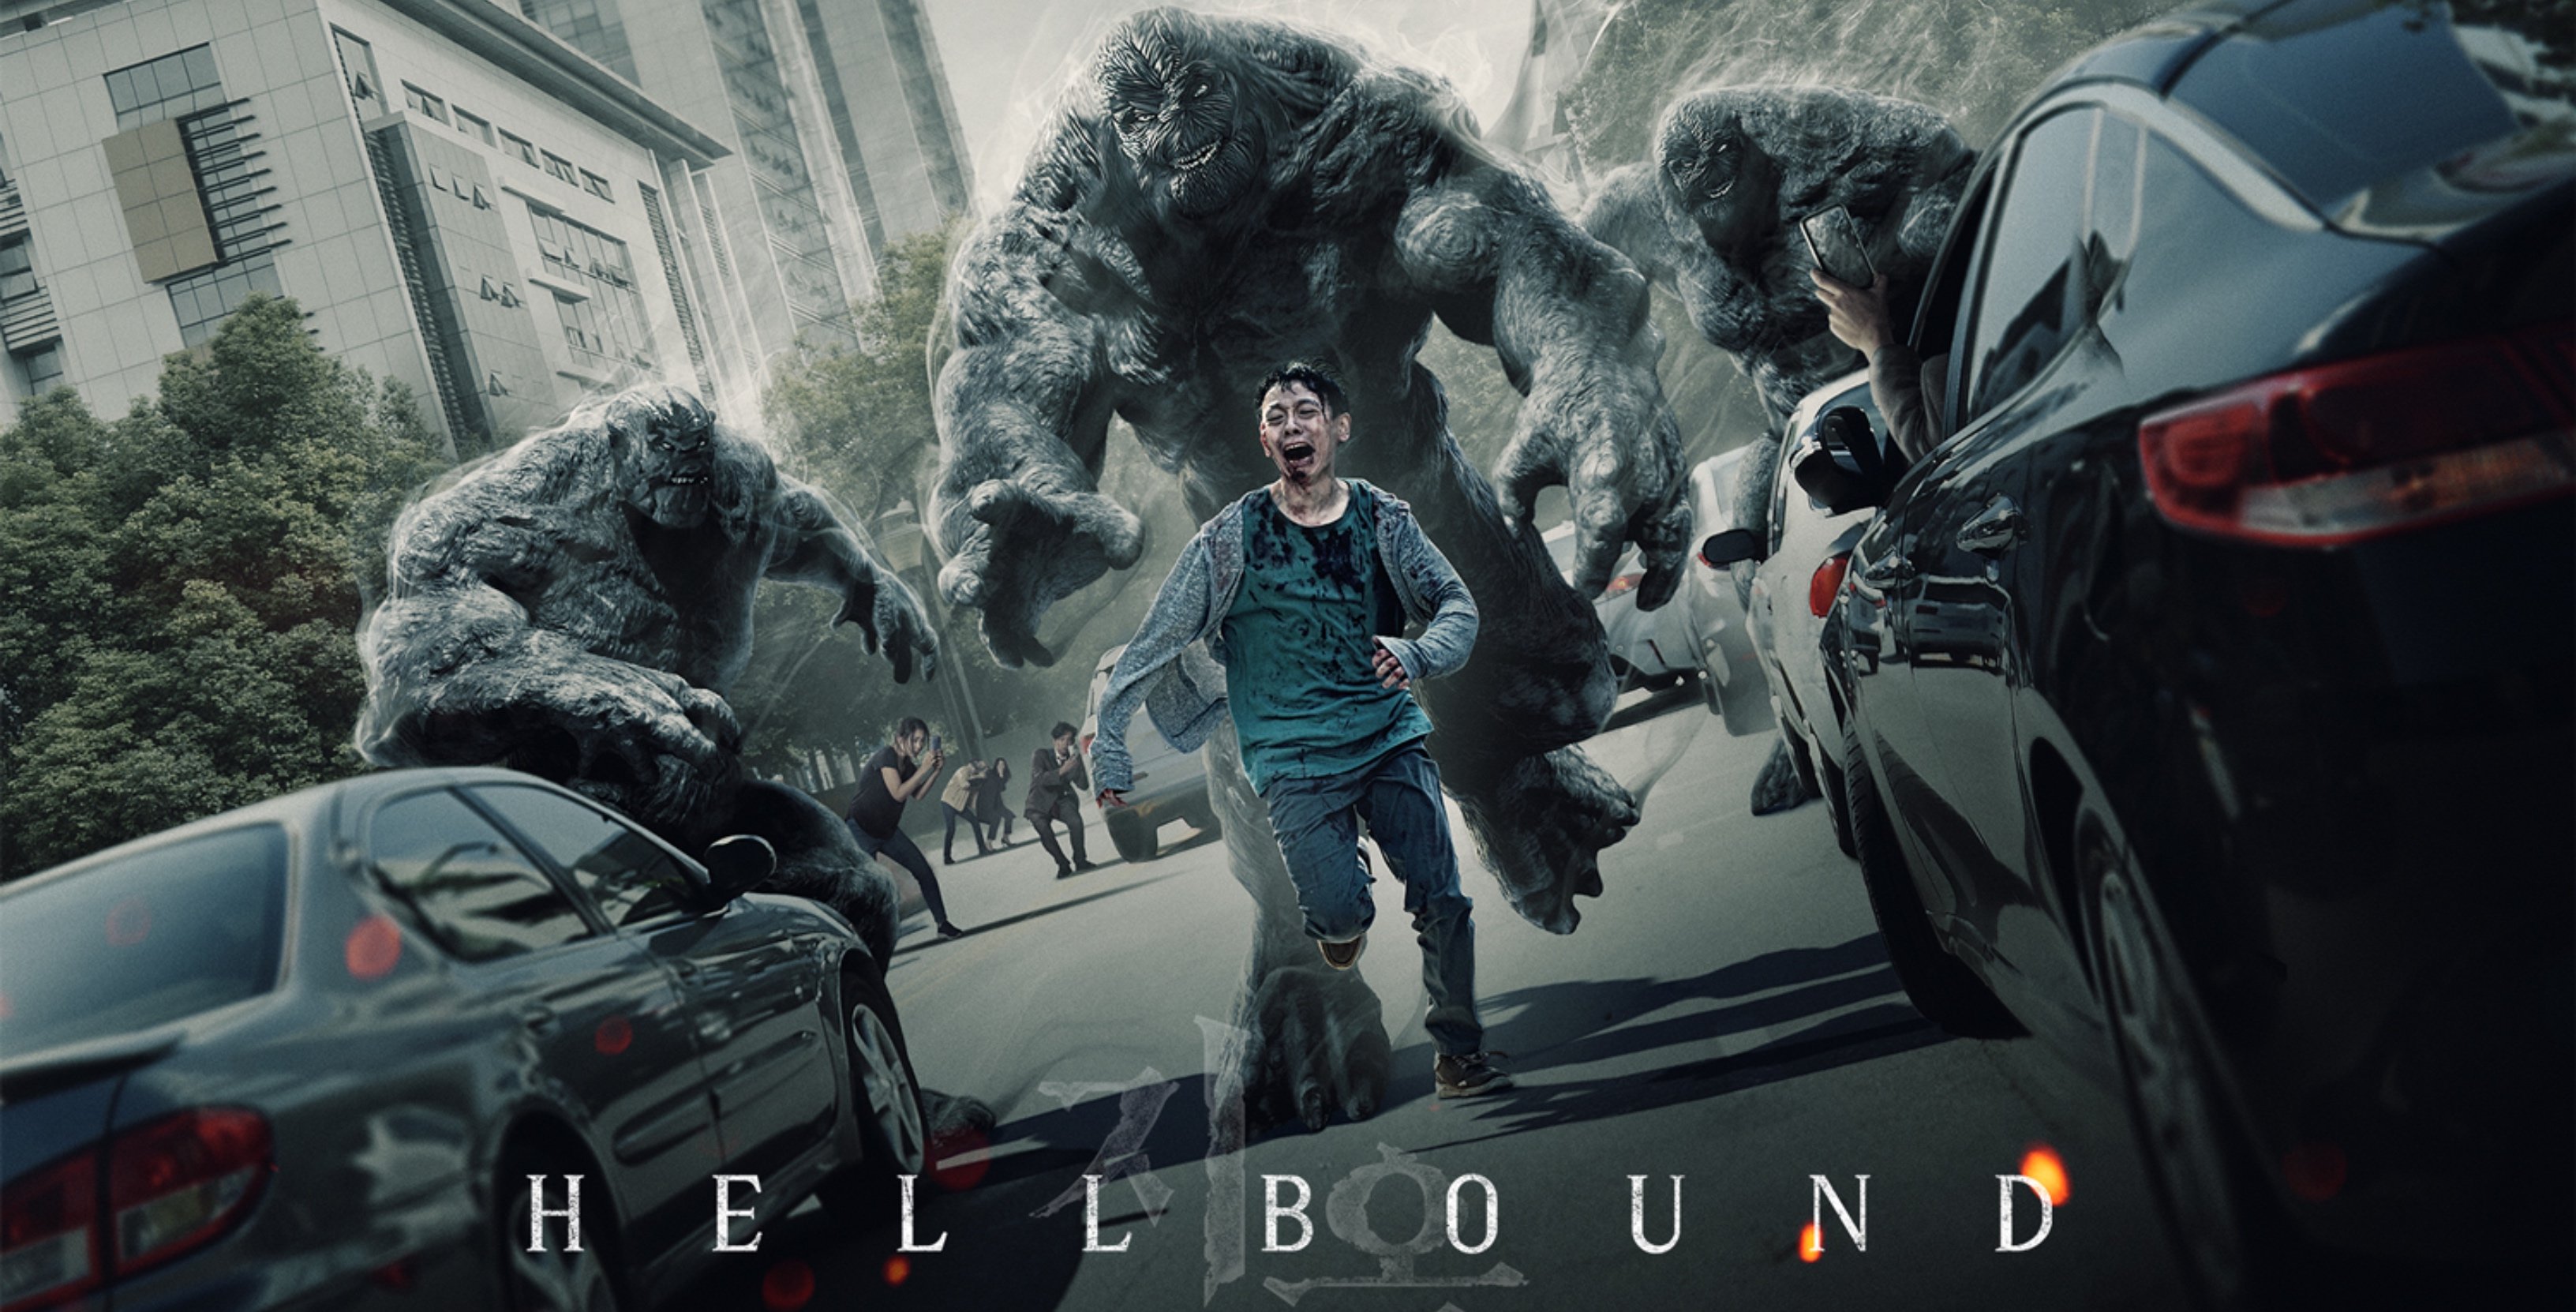 Netflix 'Hellbound' horror K-drama poster showing monsters chasing a victim through traffic.